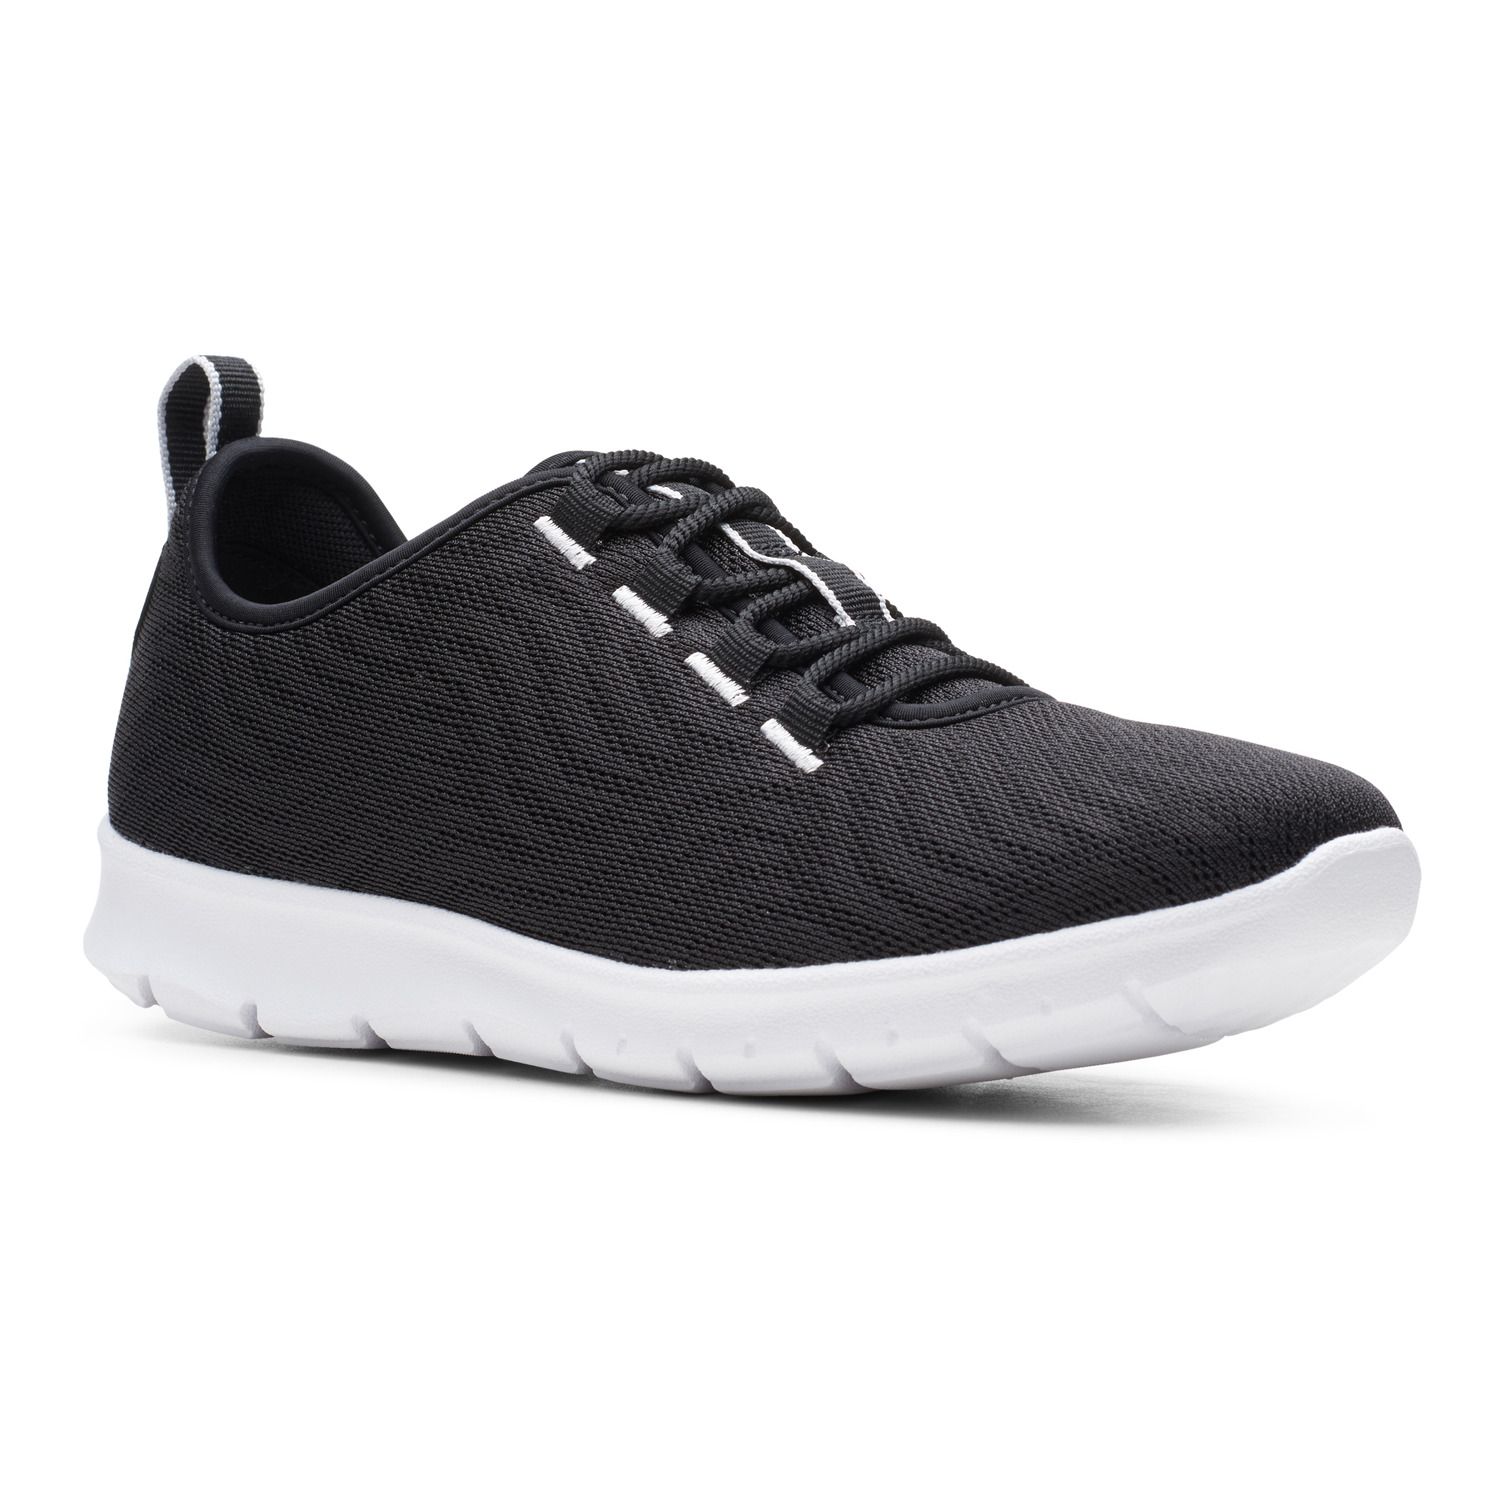 clarks womens running shoes